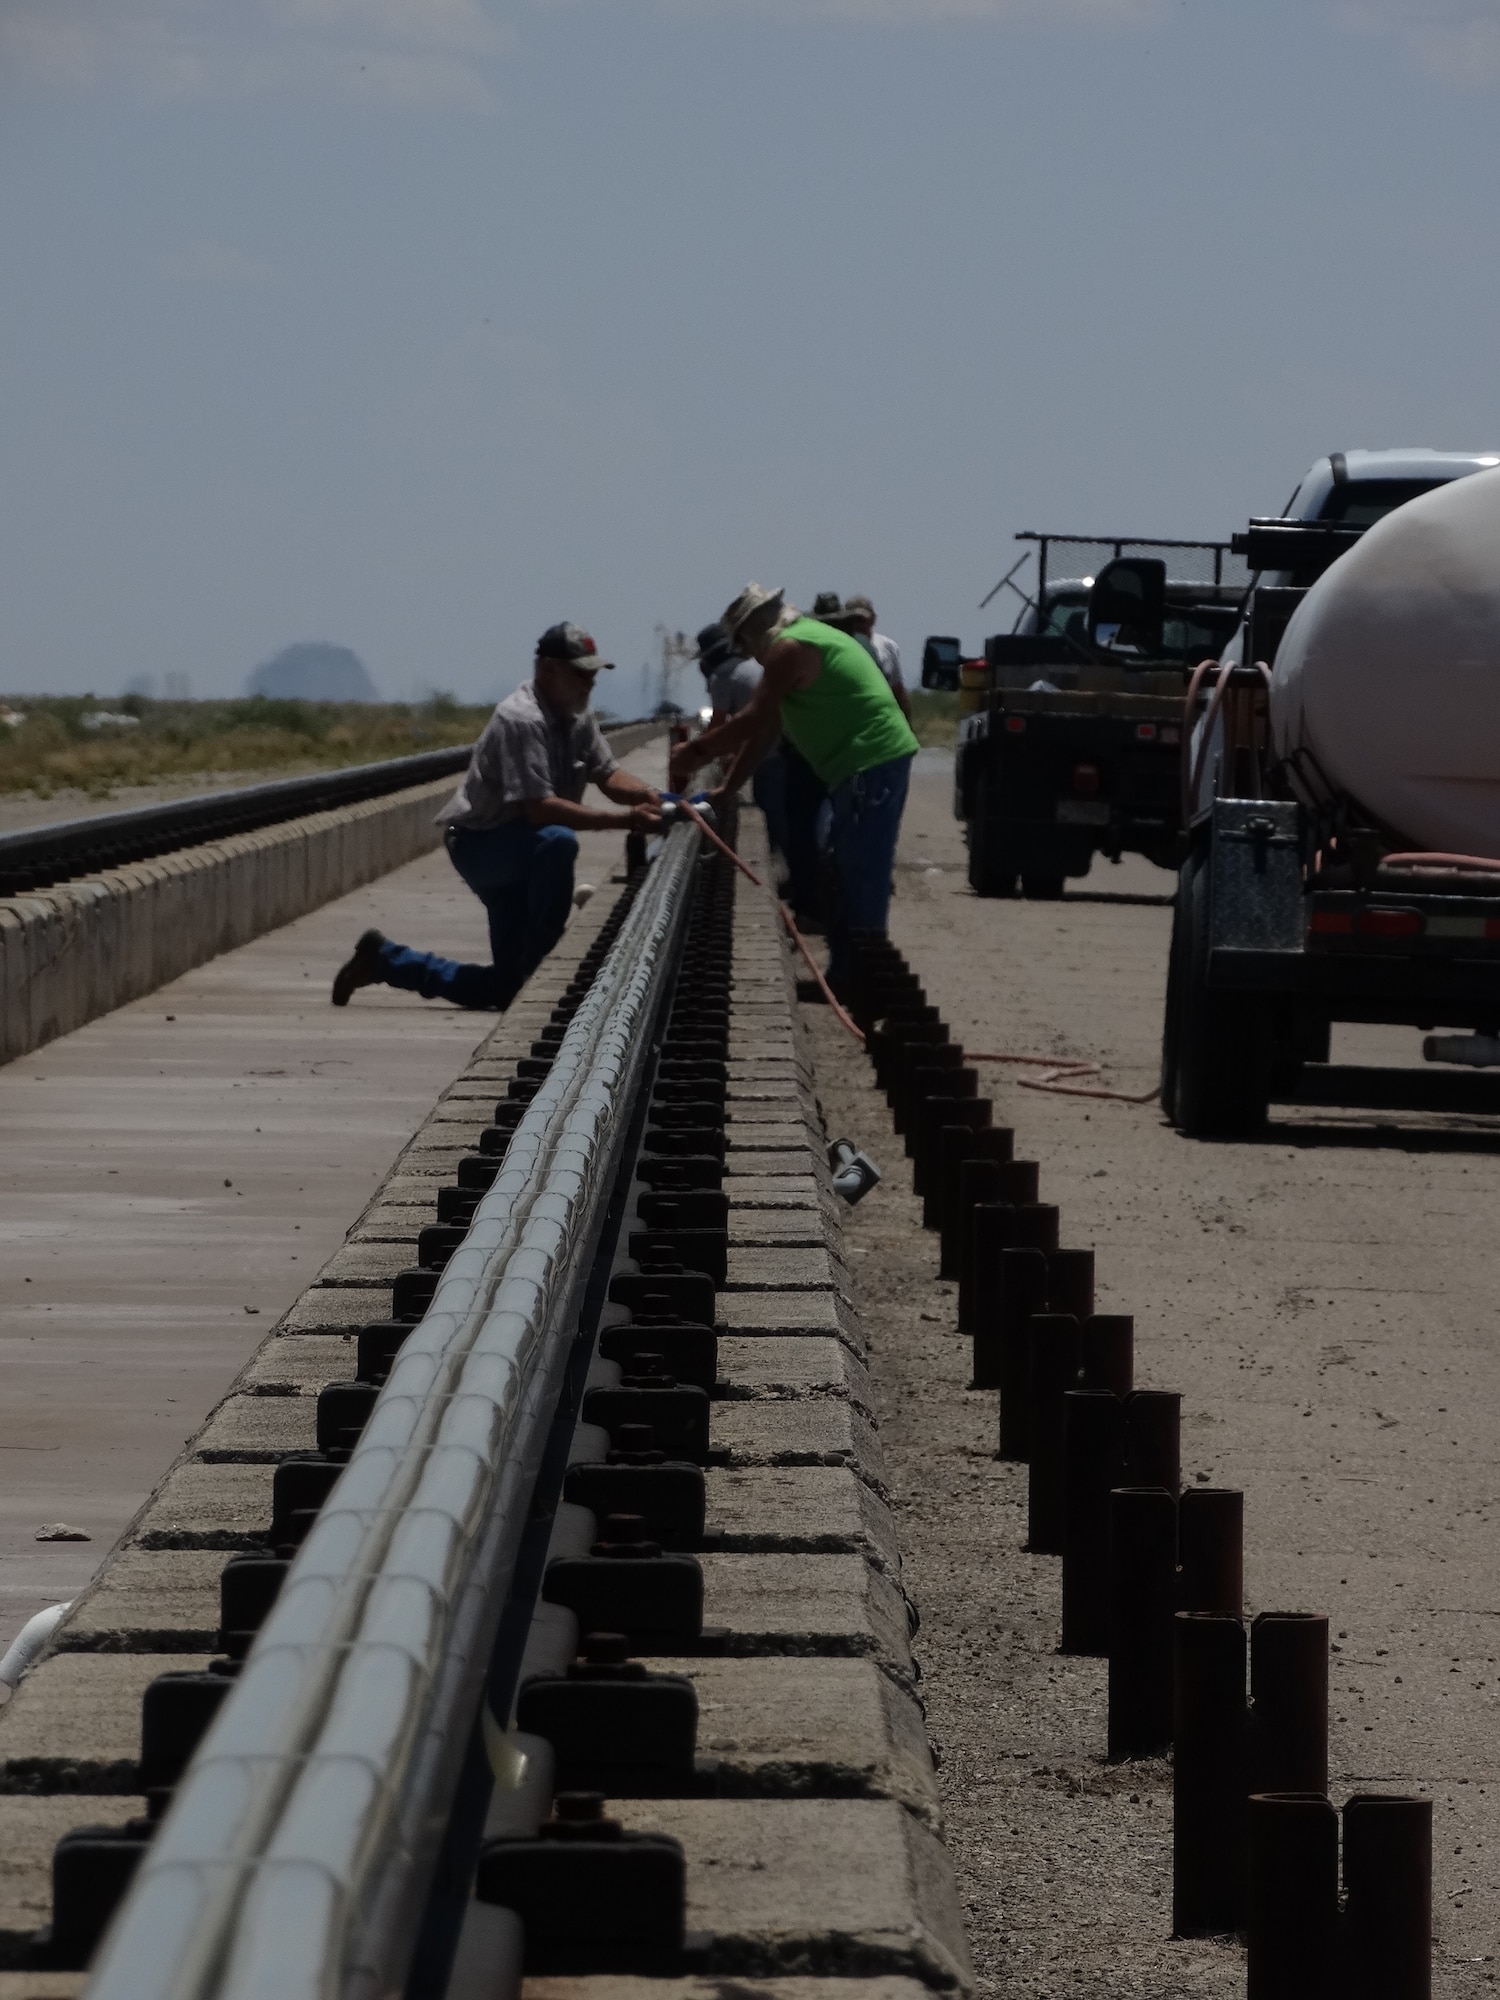 Rail-top water bags used as part of the rocket sled braking system are placed along the Holloman High Speed Test Track at Holloman Air Force Base, New Mexico. Since last summer, several tests have been conducted at the track as part of the Hypersonic Readiness program. This program, an initiative of the 846th Test Squadron, is a series of tests preparing for future rocket sled testing. (U.S. Air Force photo)